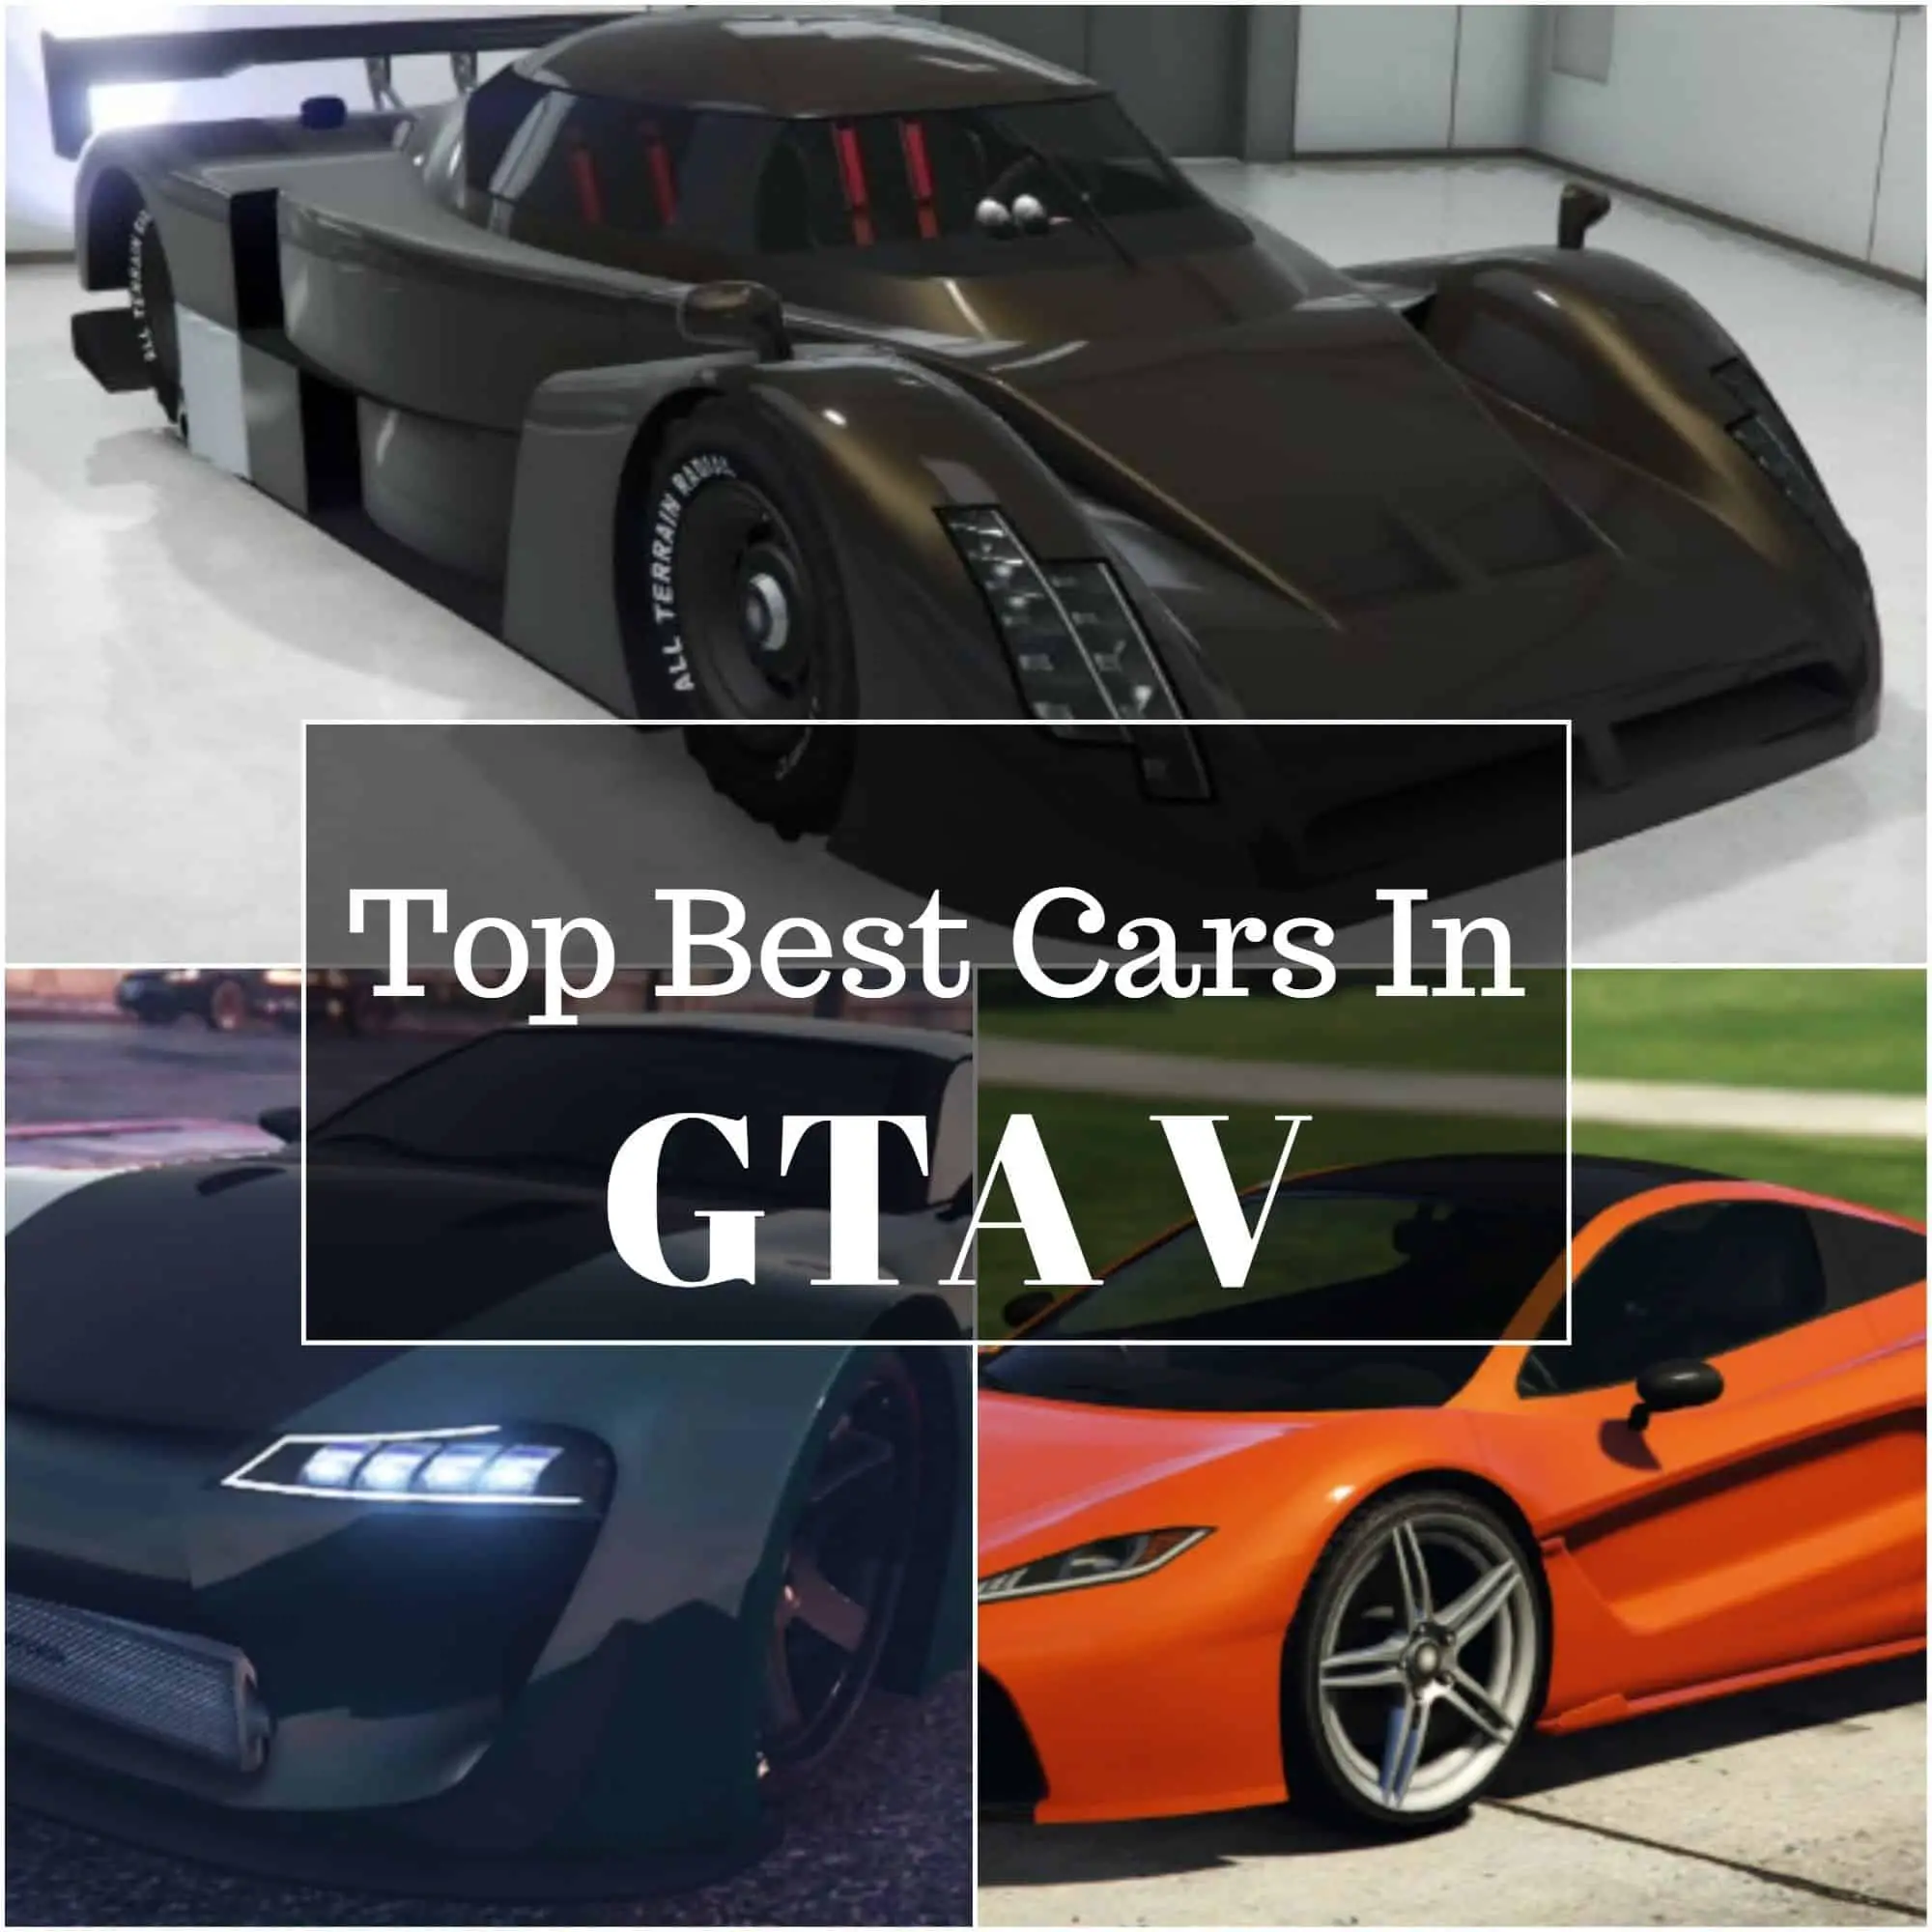 Gta 5 What Is the Best Car